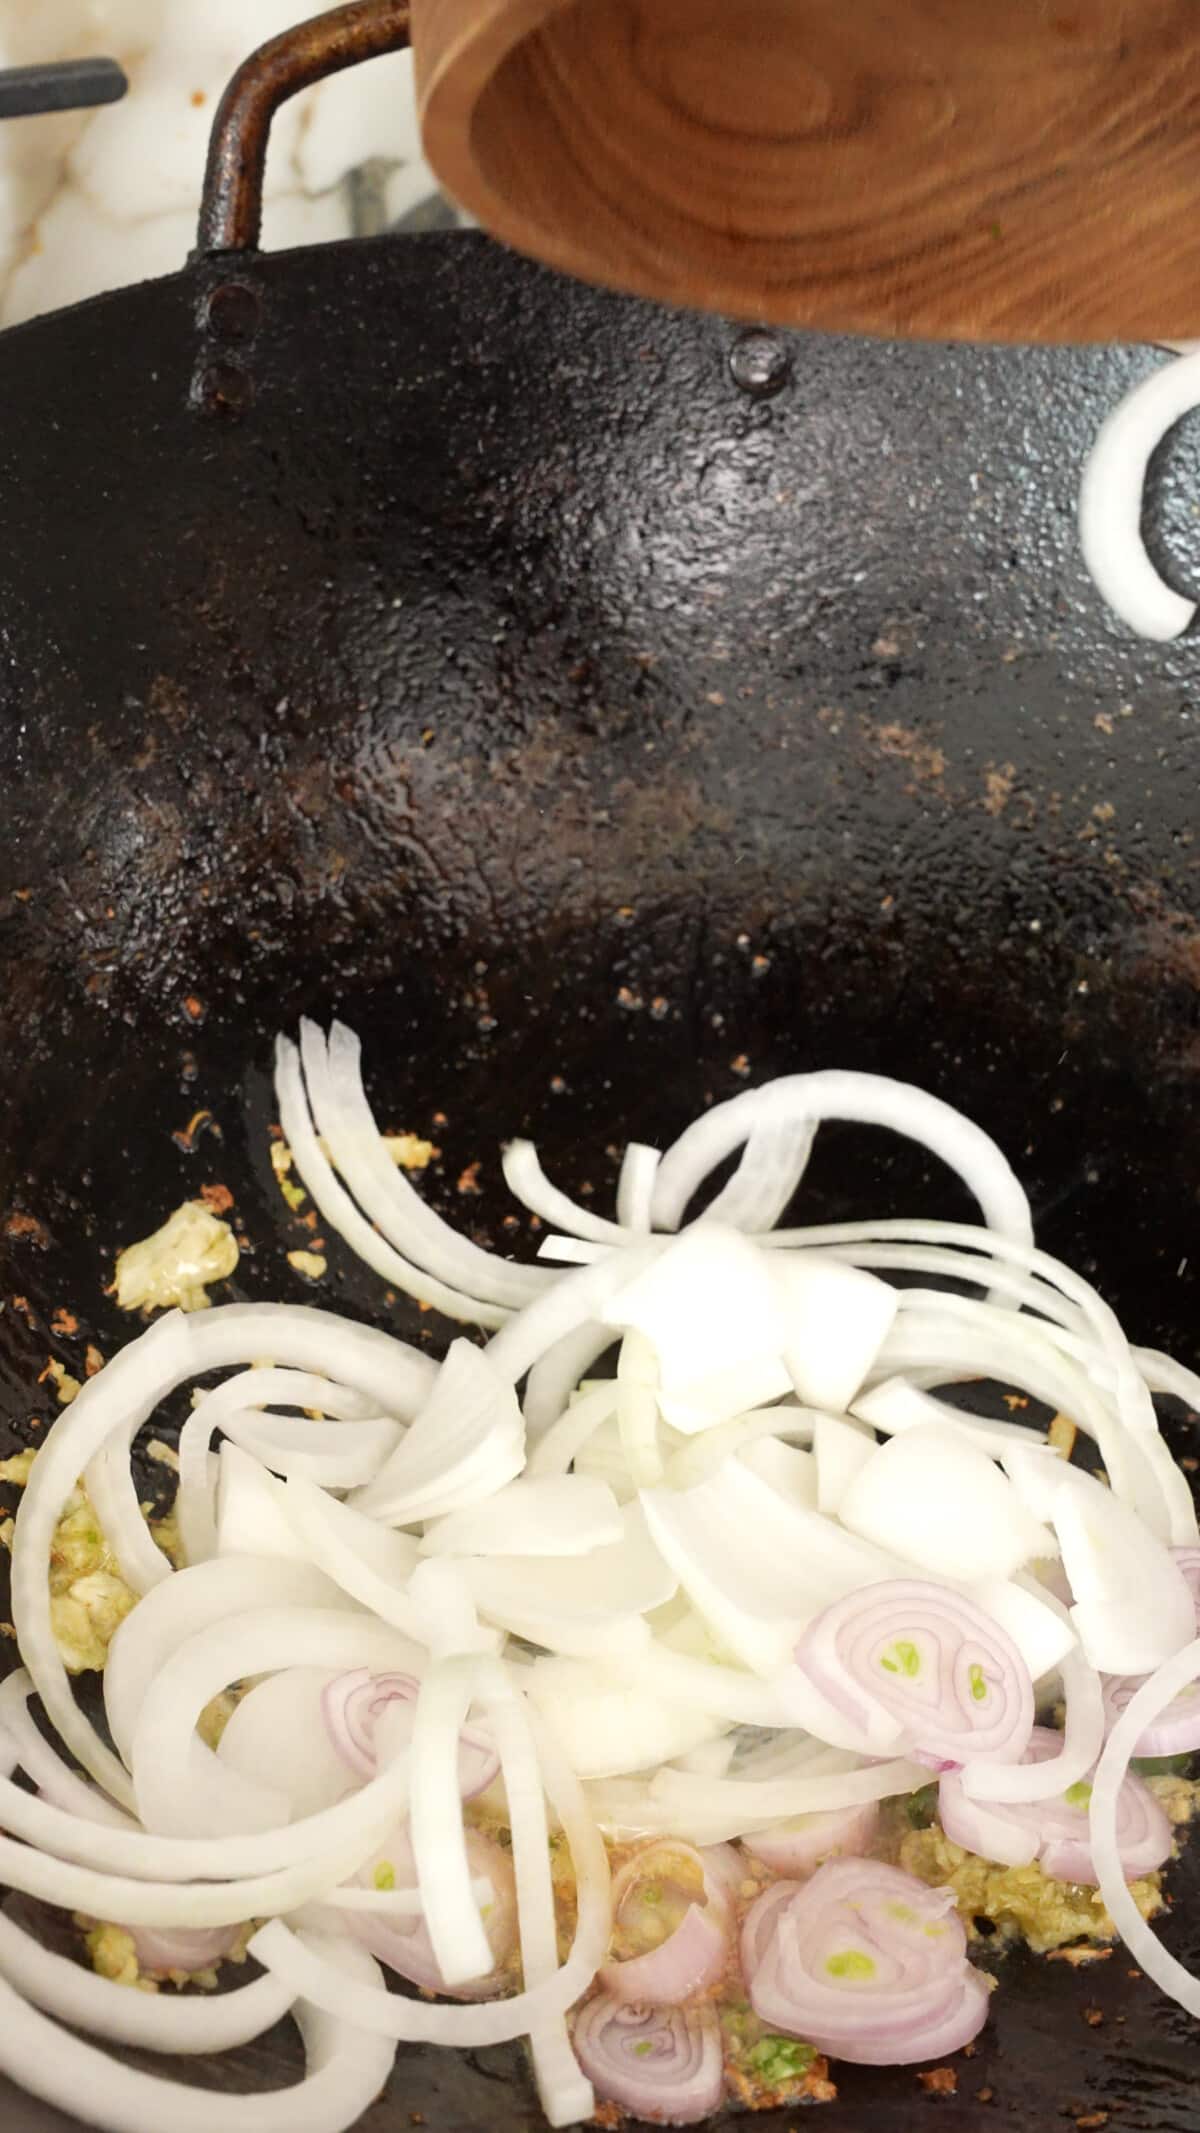 Onions and shallots being added to the wok with thai chili and garlic paste.